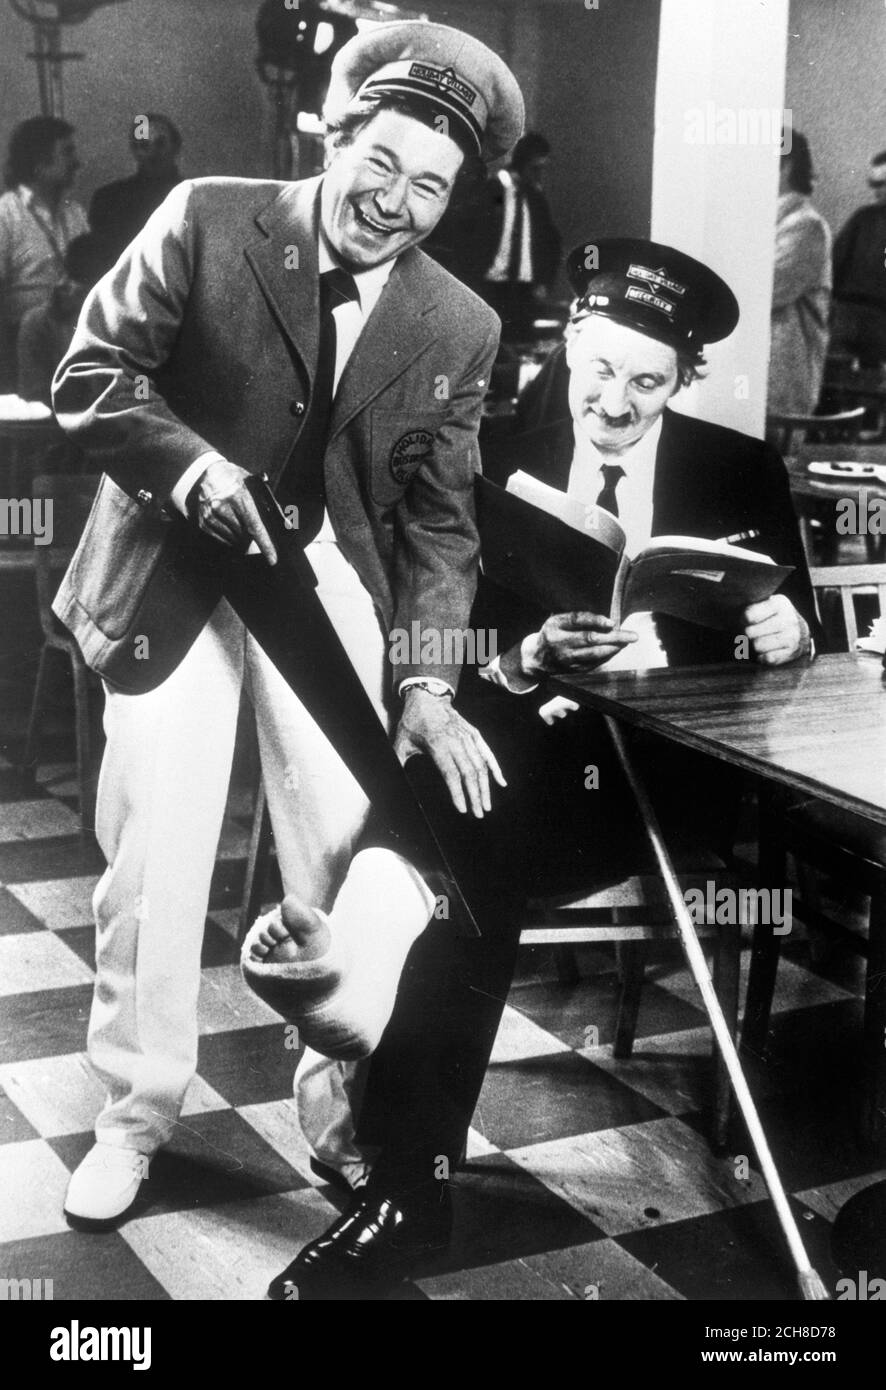 Actor Stephen Lewis (right), aka bus inspector Blake from On the Buses, larks around with Reg Varney on the set of Holiday on the Buses. Lewis cracked a bone in his ankle and the screenplay was rewritten so he could play a 'limping' role. Stock Photo